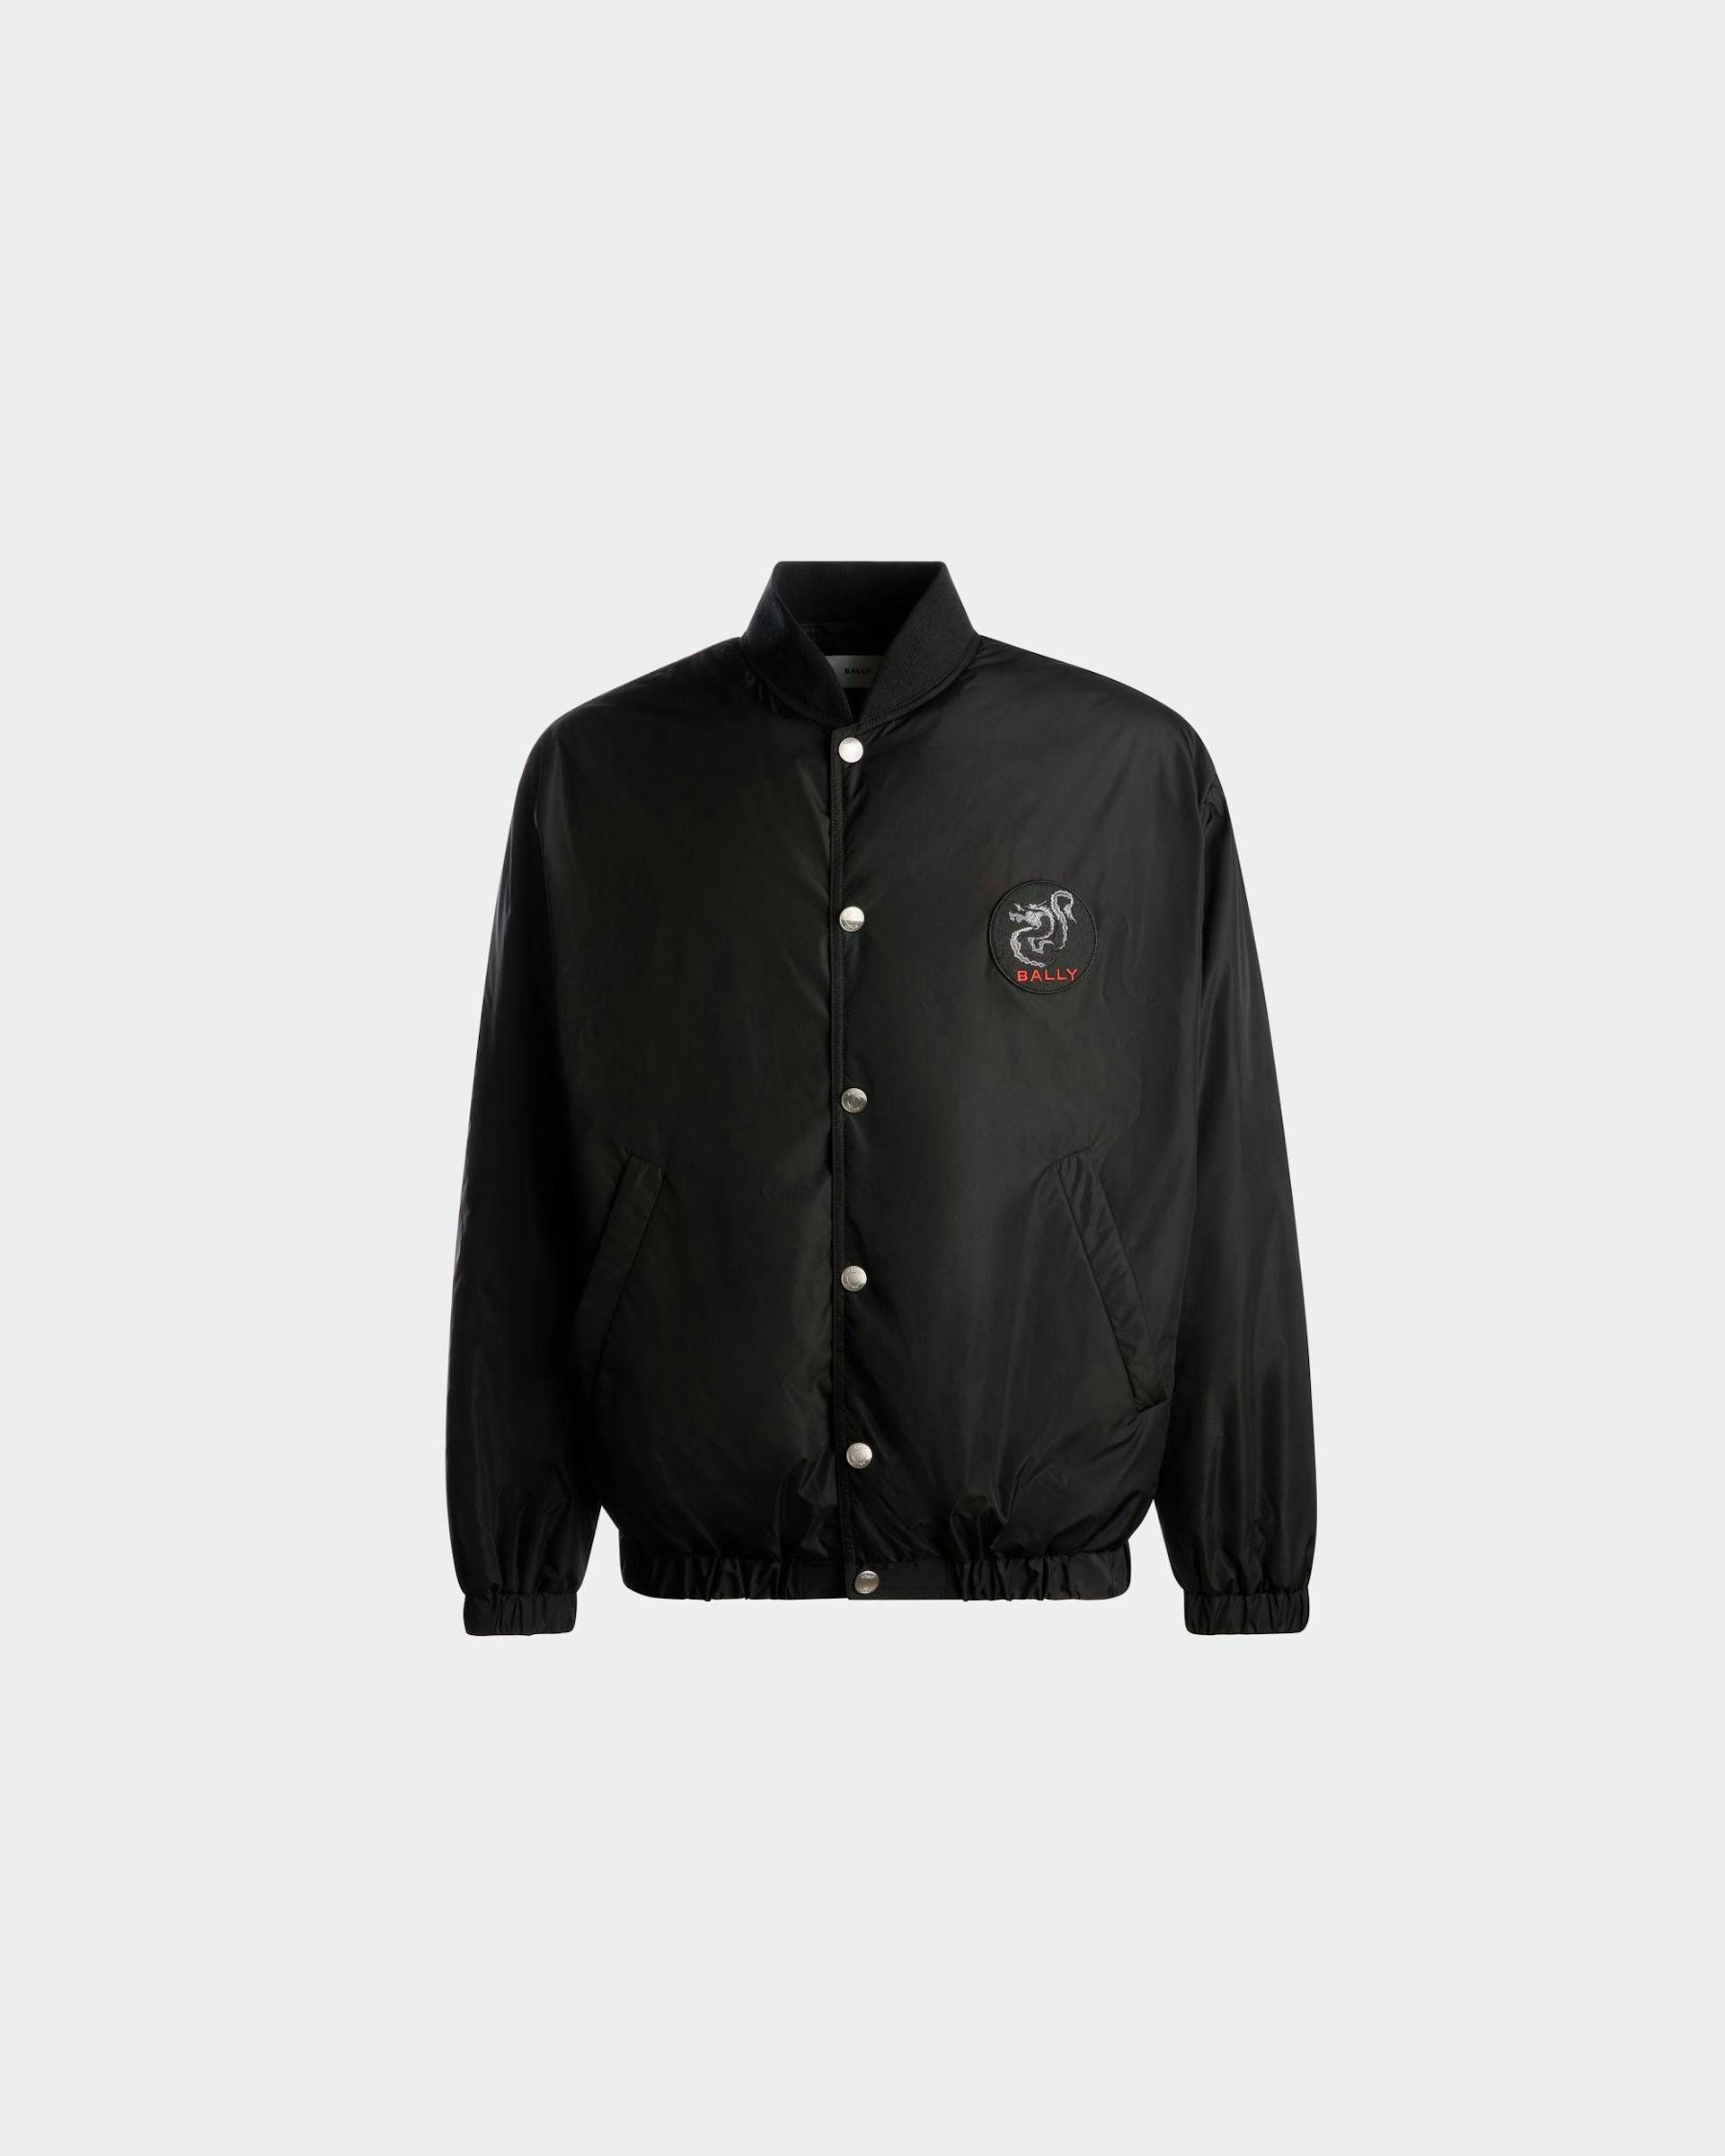 Men's Bomber In Black Synthetic Fabric | Bally | Still Life Front